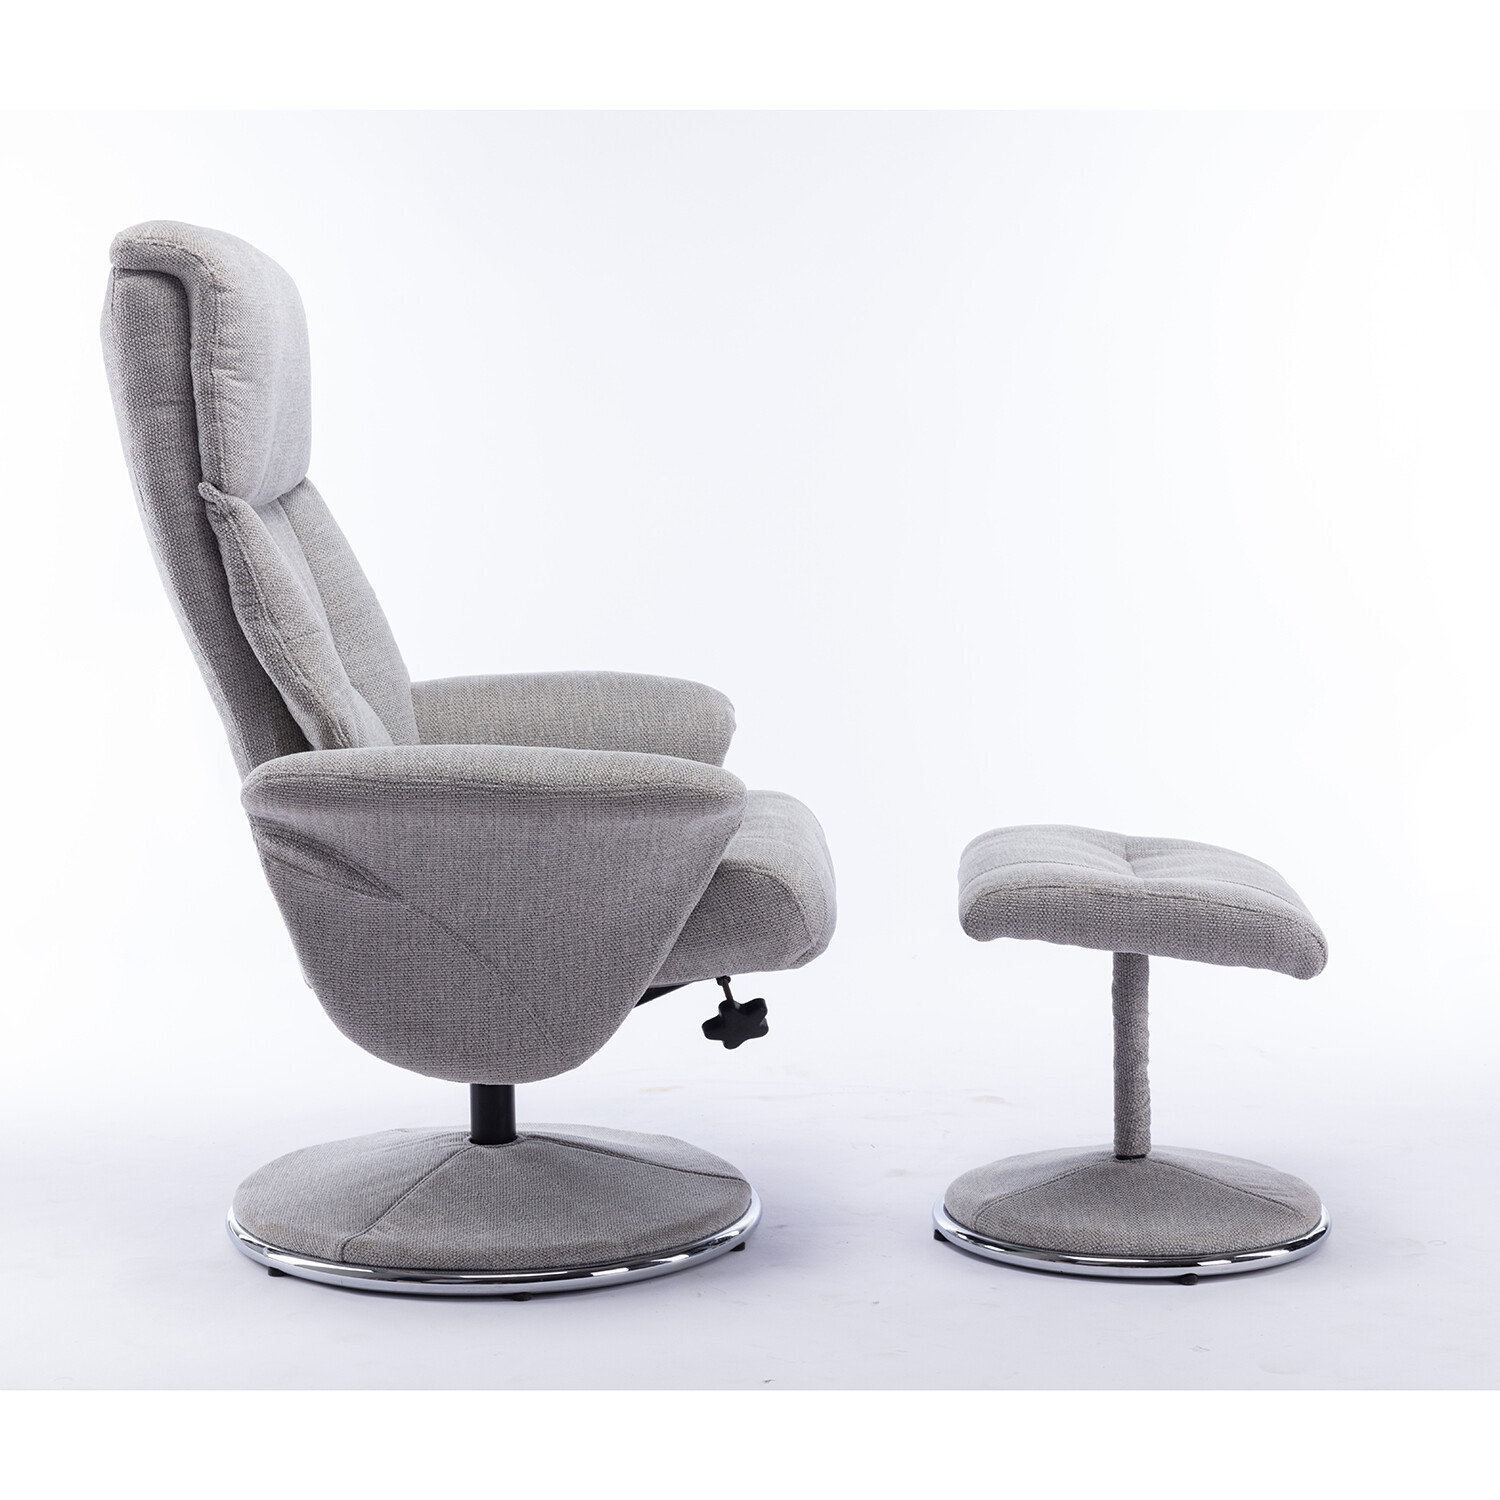 Madrid Grey Fabric Swivel TV Chair with Footrest Image 4